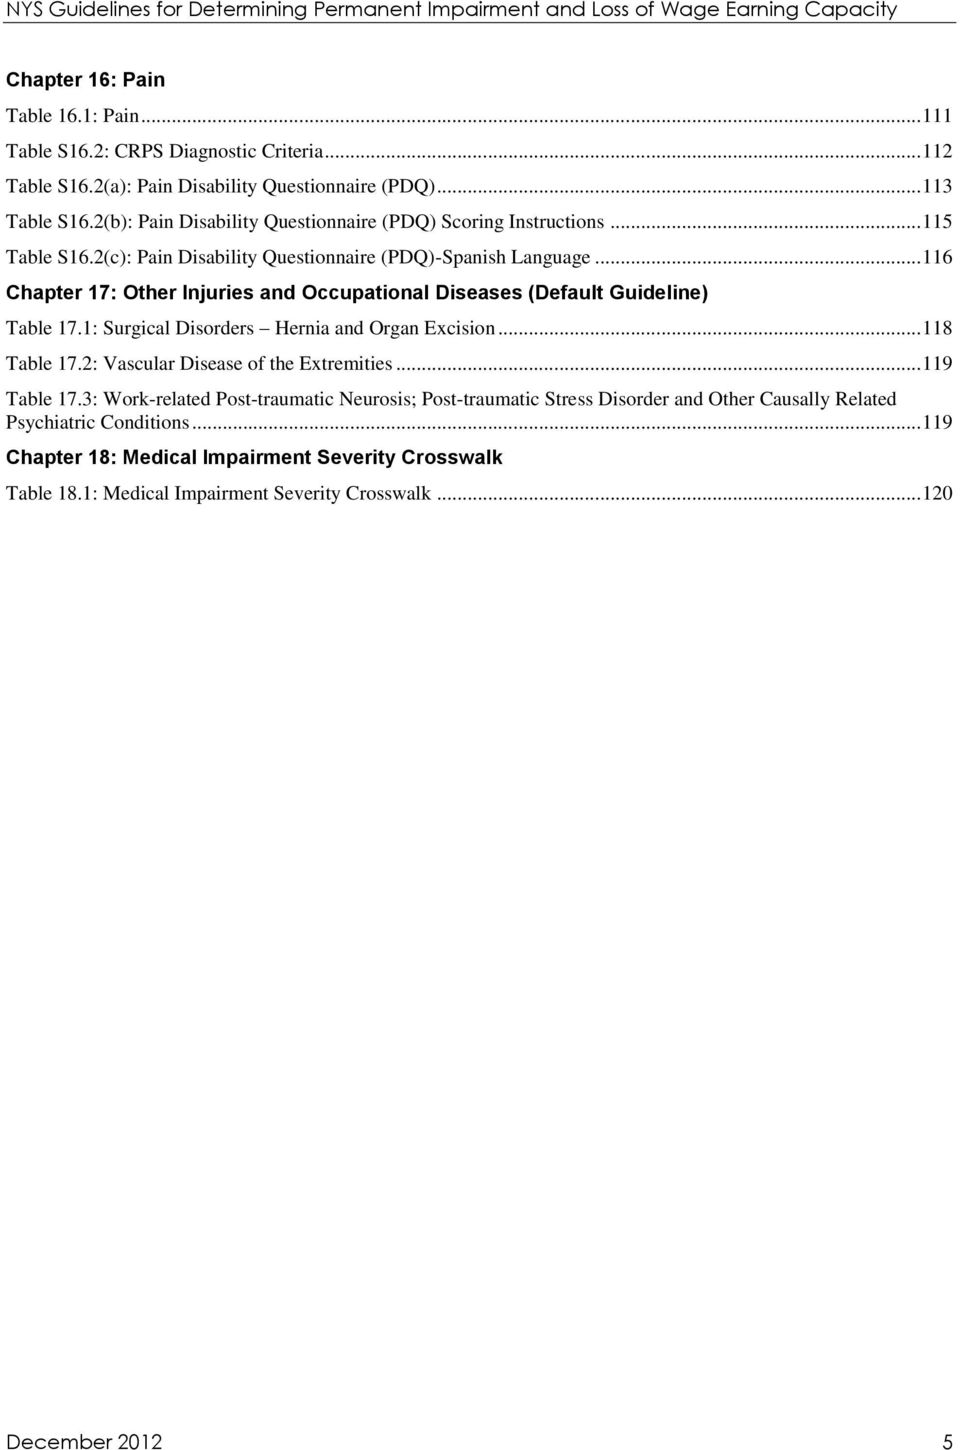 .. 116 Chapter 17: Other Injuries and Occupational Diseases (Default Guideline) Table 17.1: Surgical Disorders Hernia and Organ Excision... 118 Table 17.